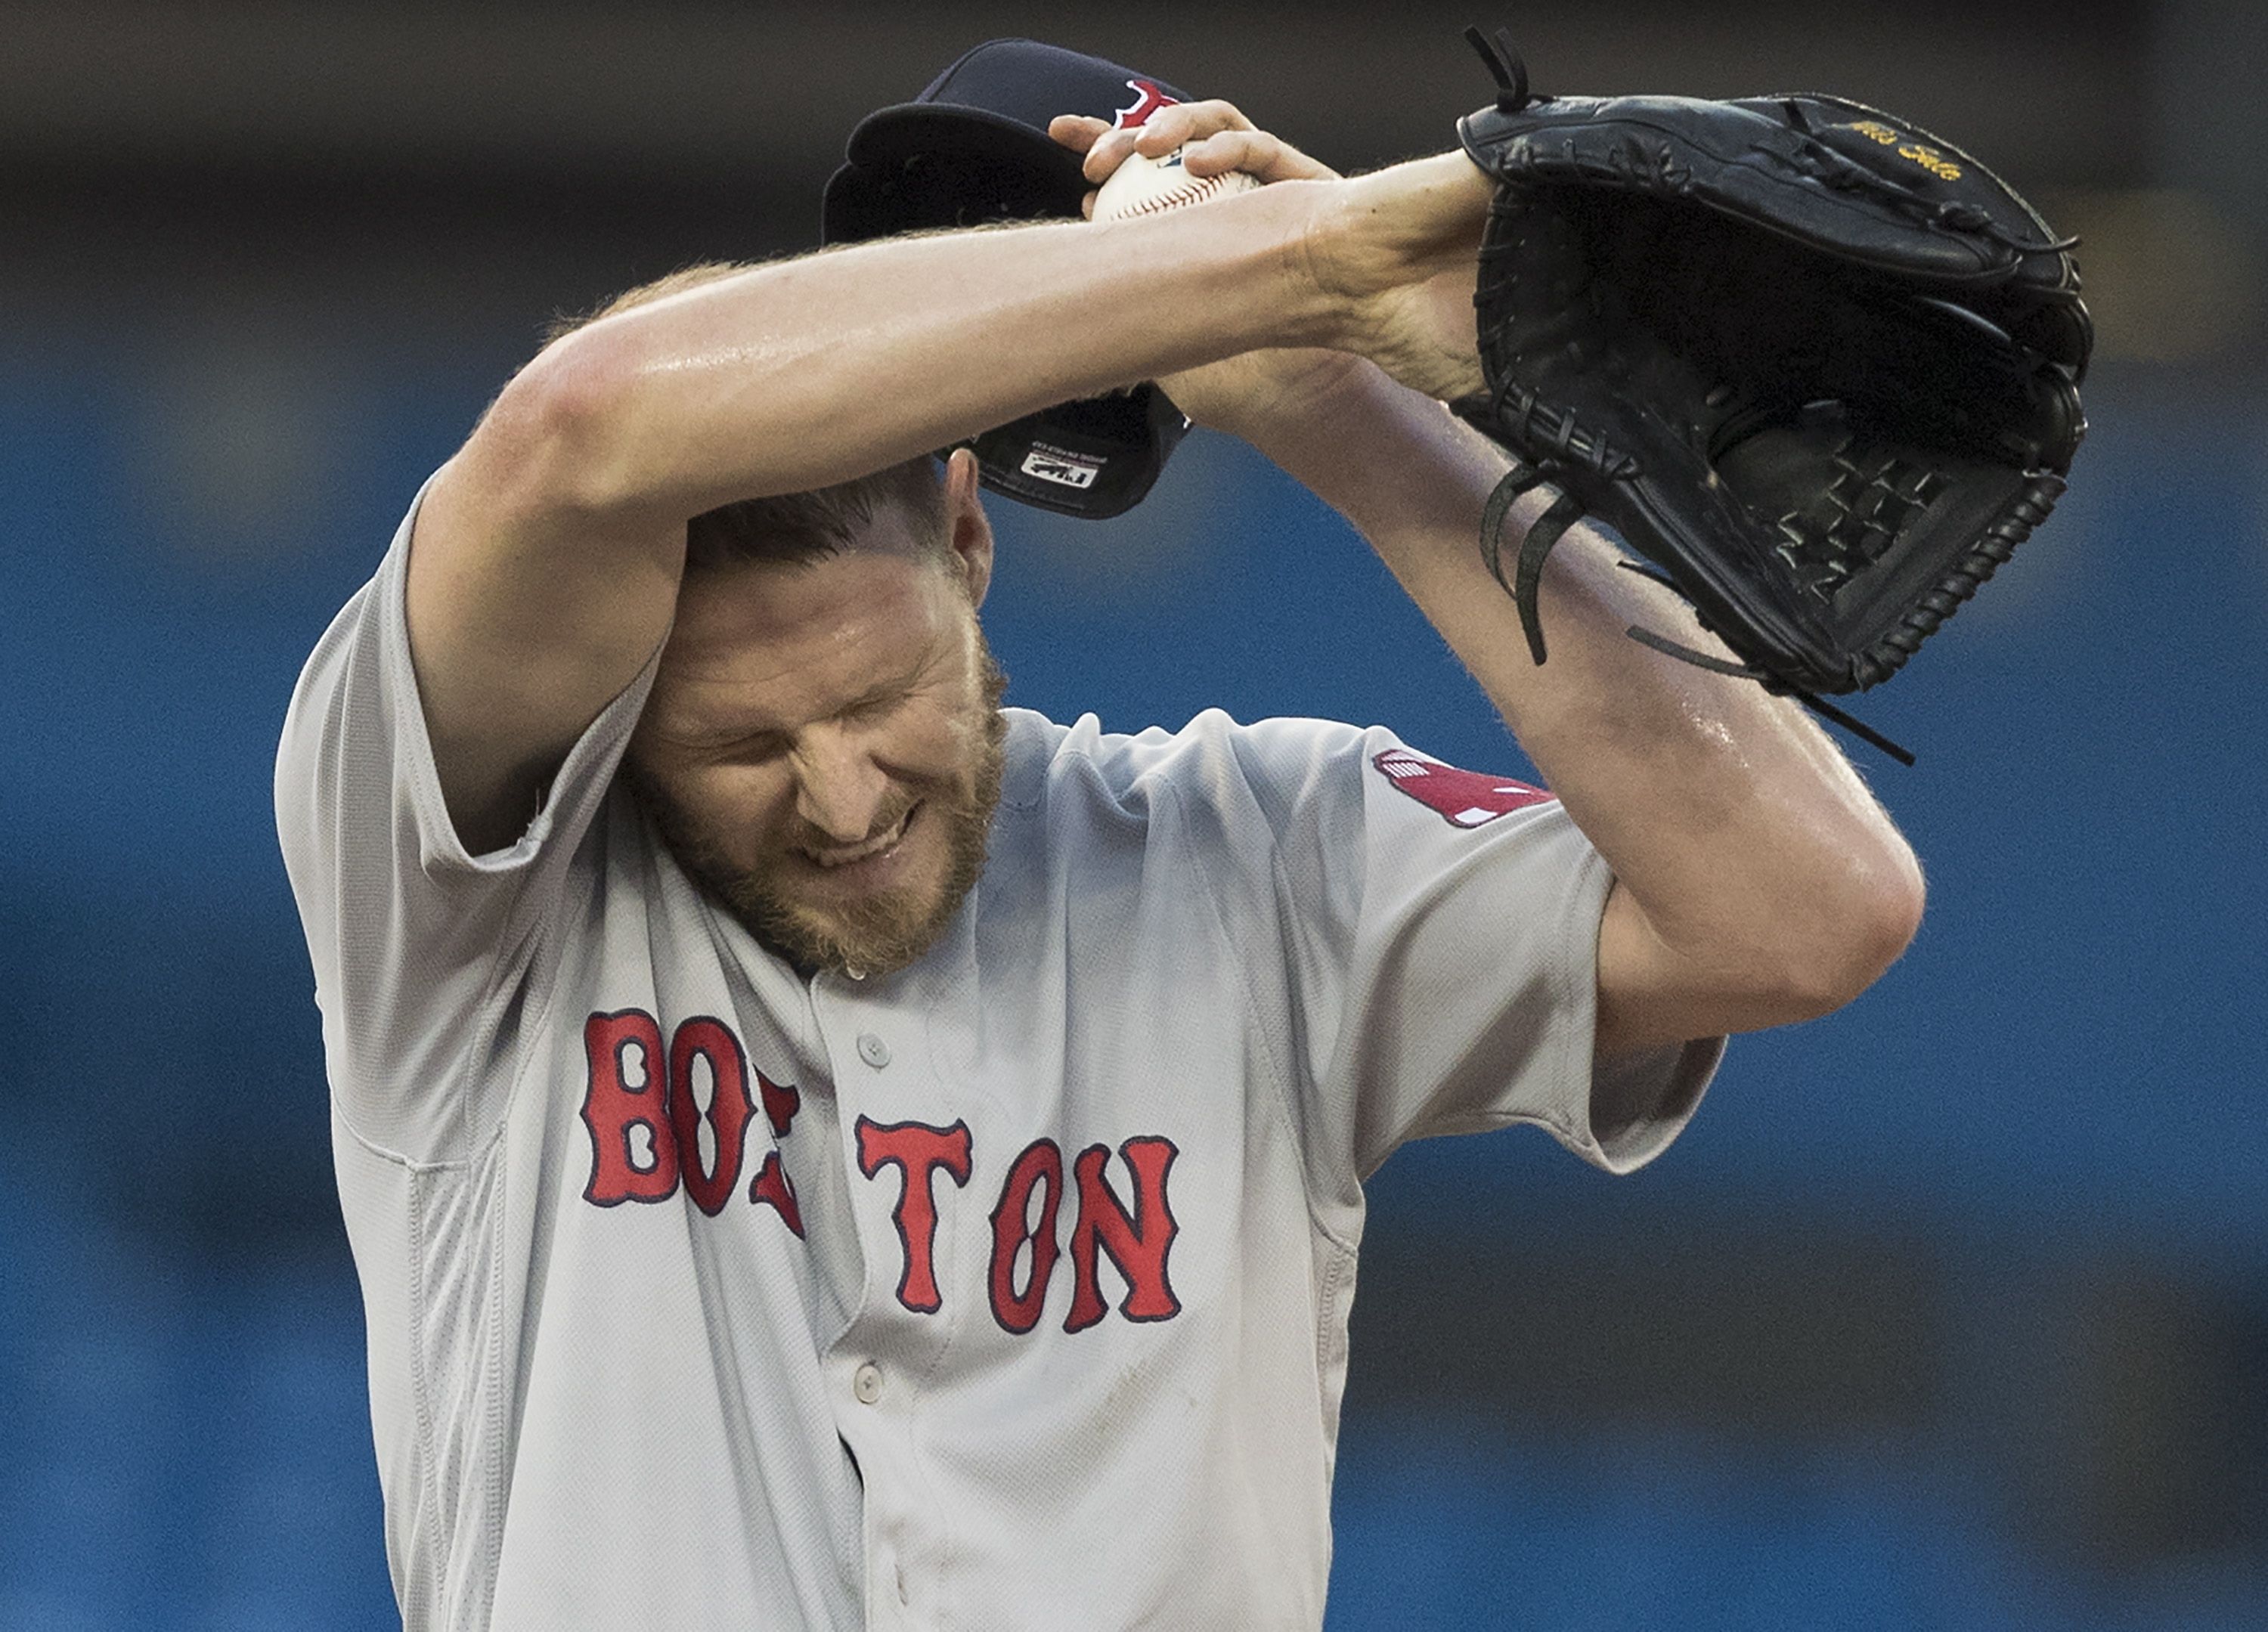 Chris Sale might just never get healthy again